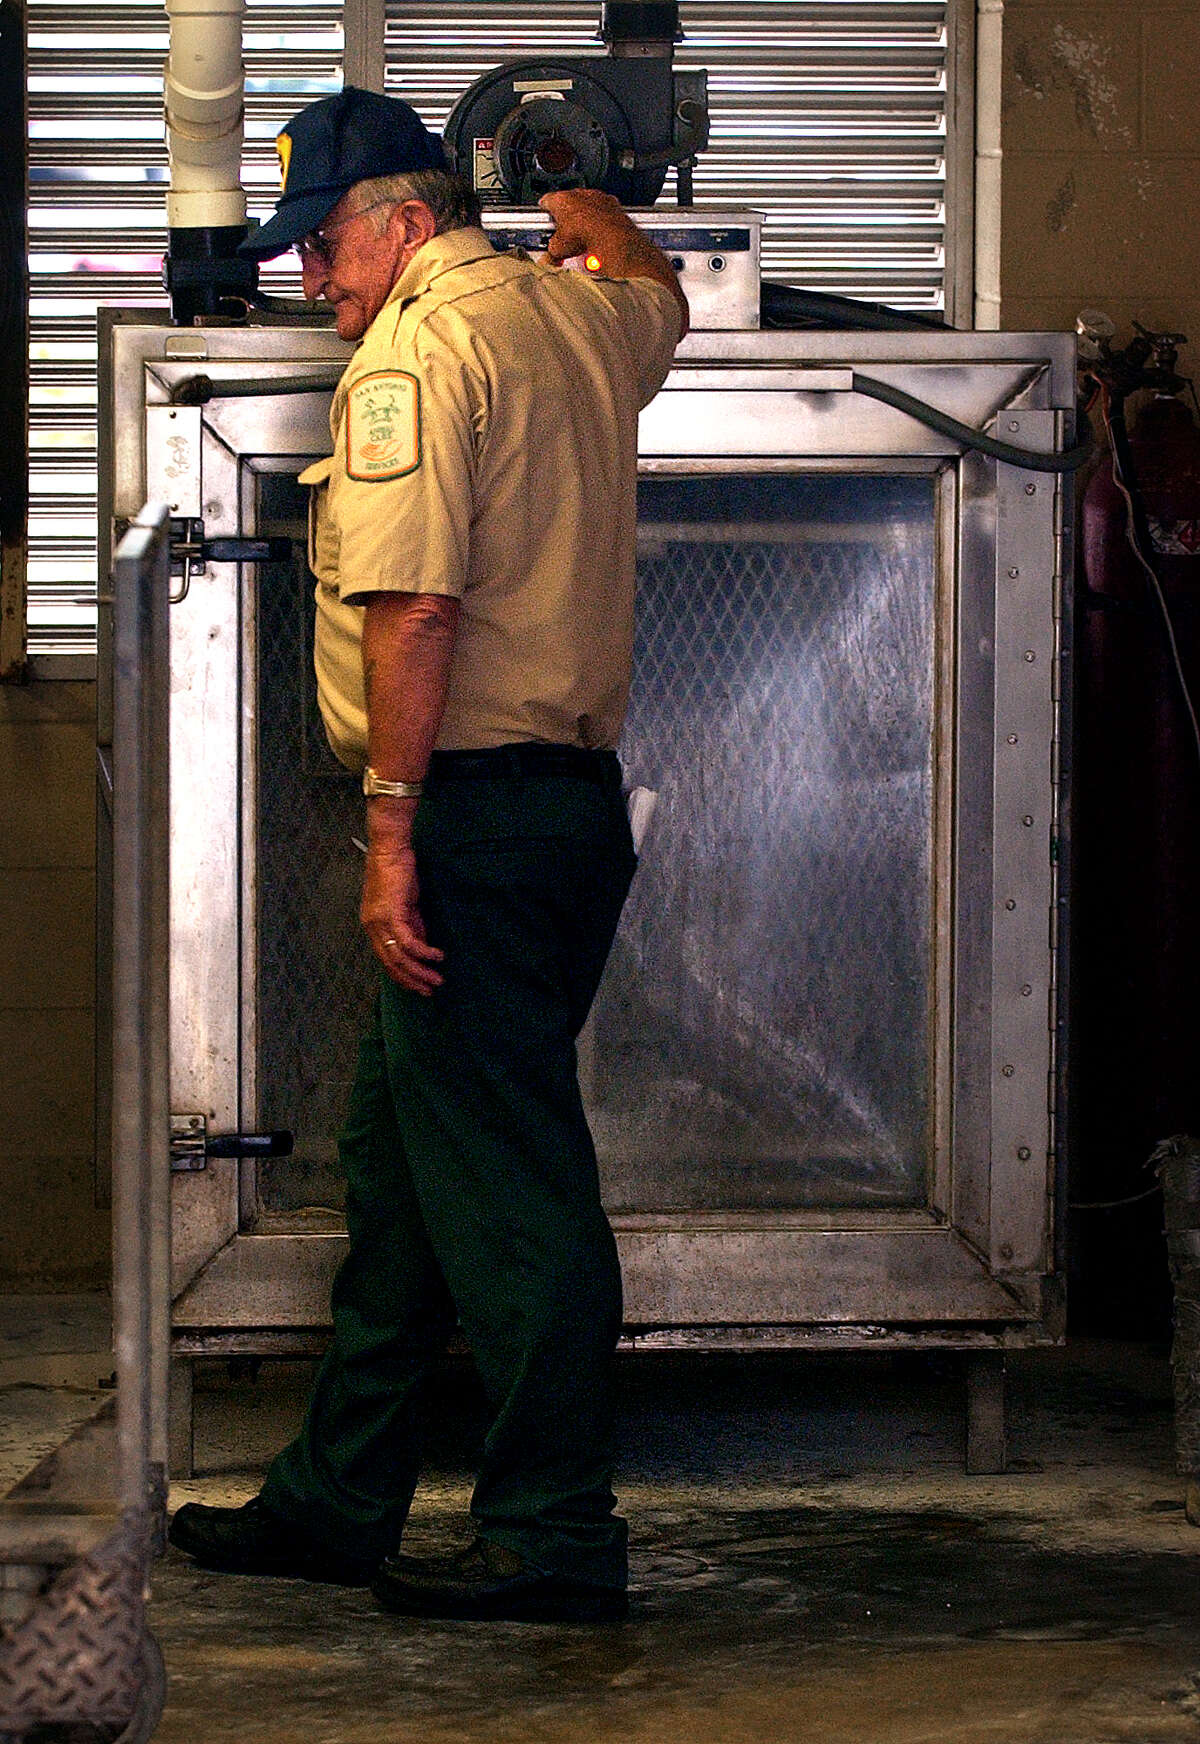 David Lee Nichols of the Animal Care and Control Department on Tuleta, pushes a button to start the gasing process to euthanize a cage of dogs, Saturday, June 12, 2004. photo Bob Owen